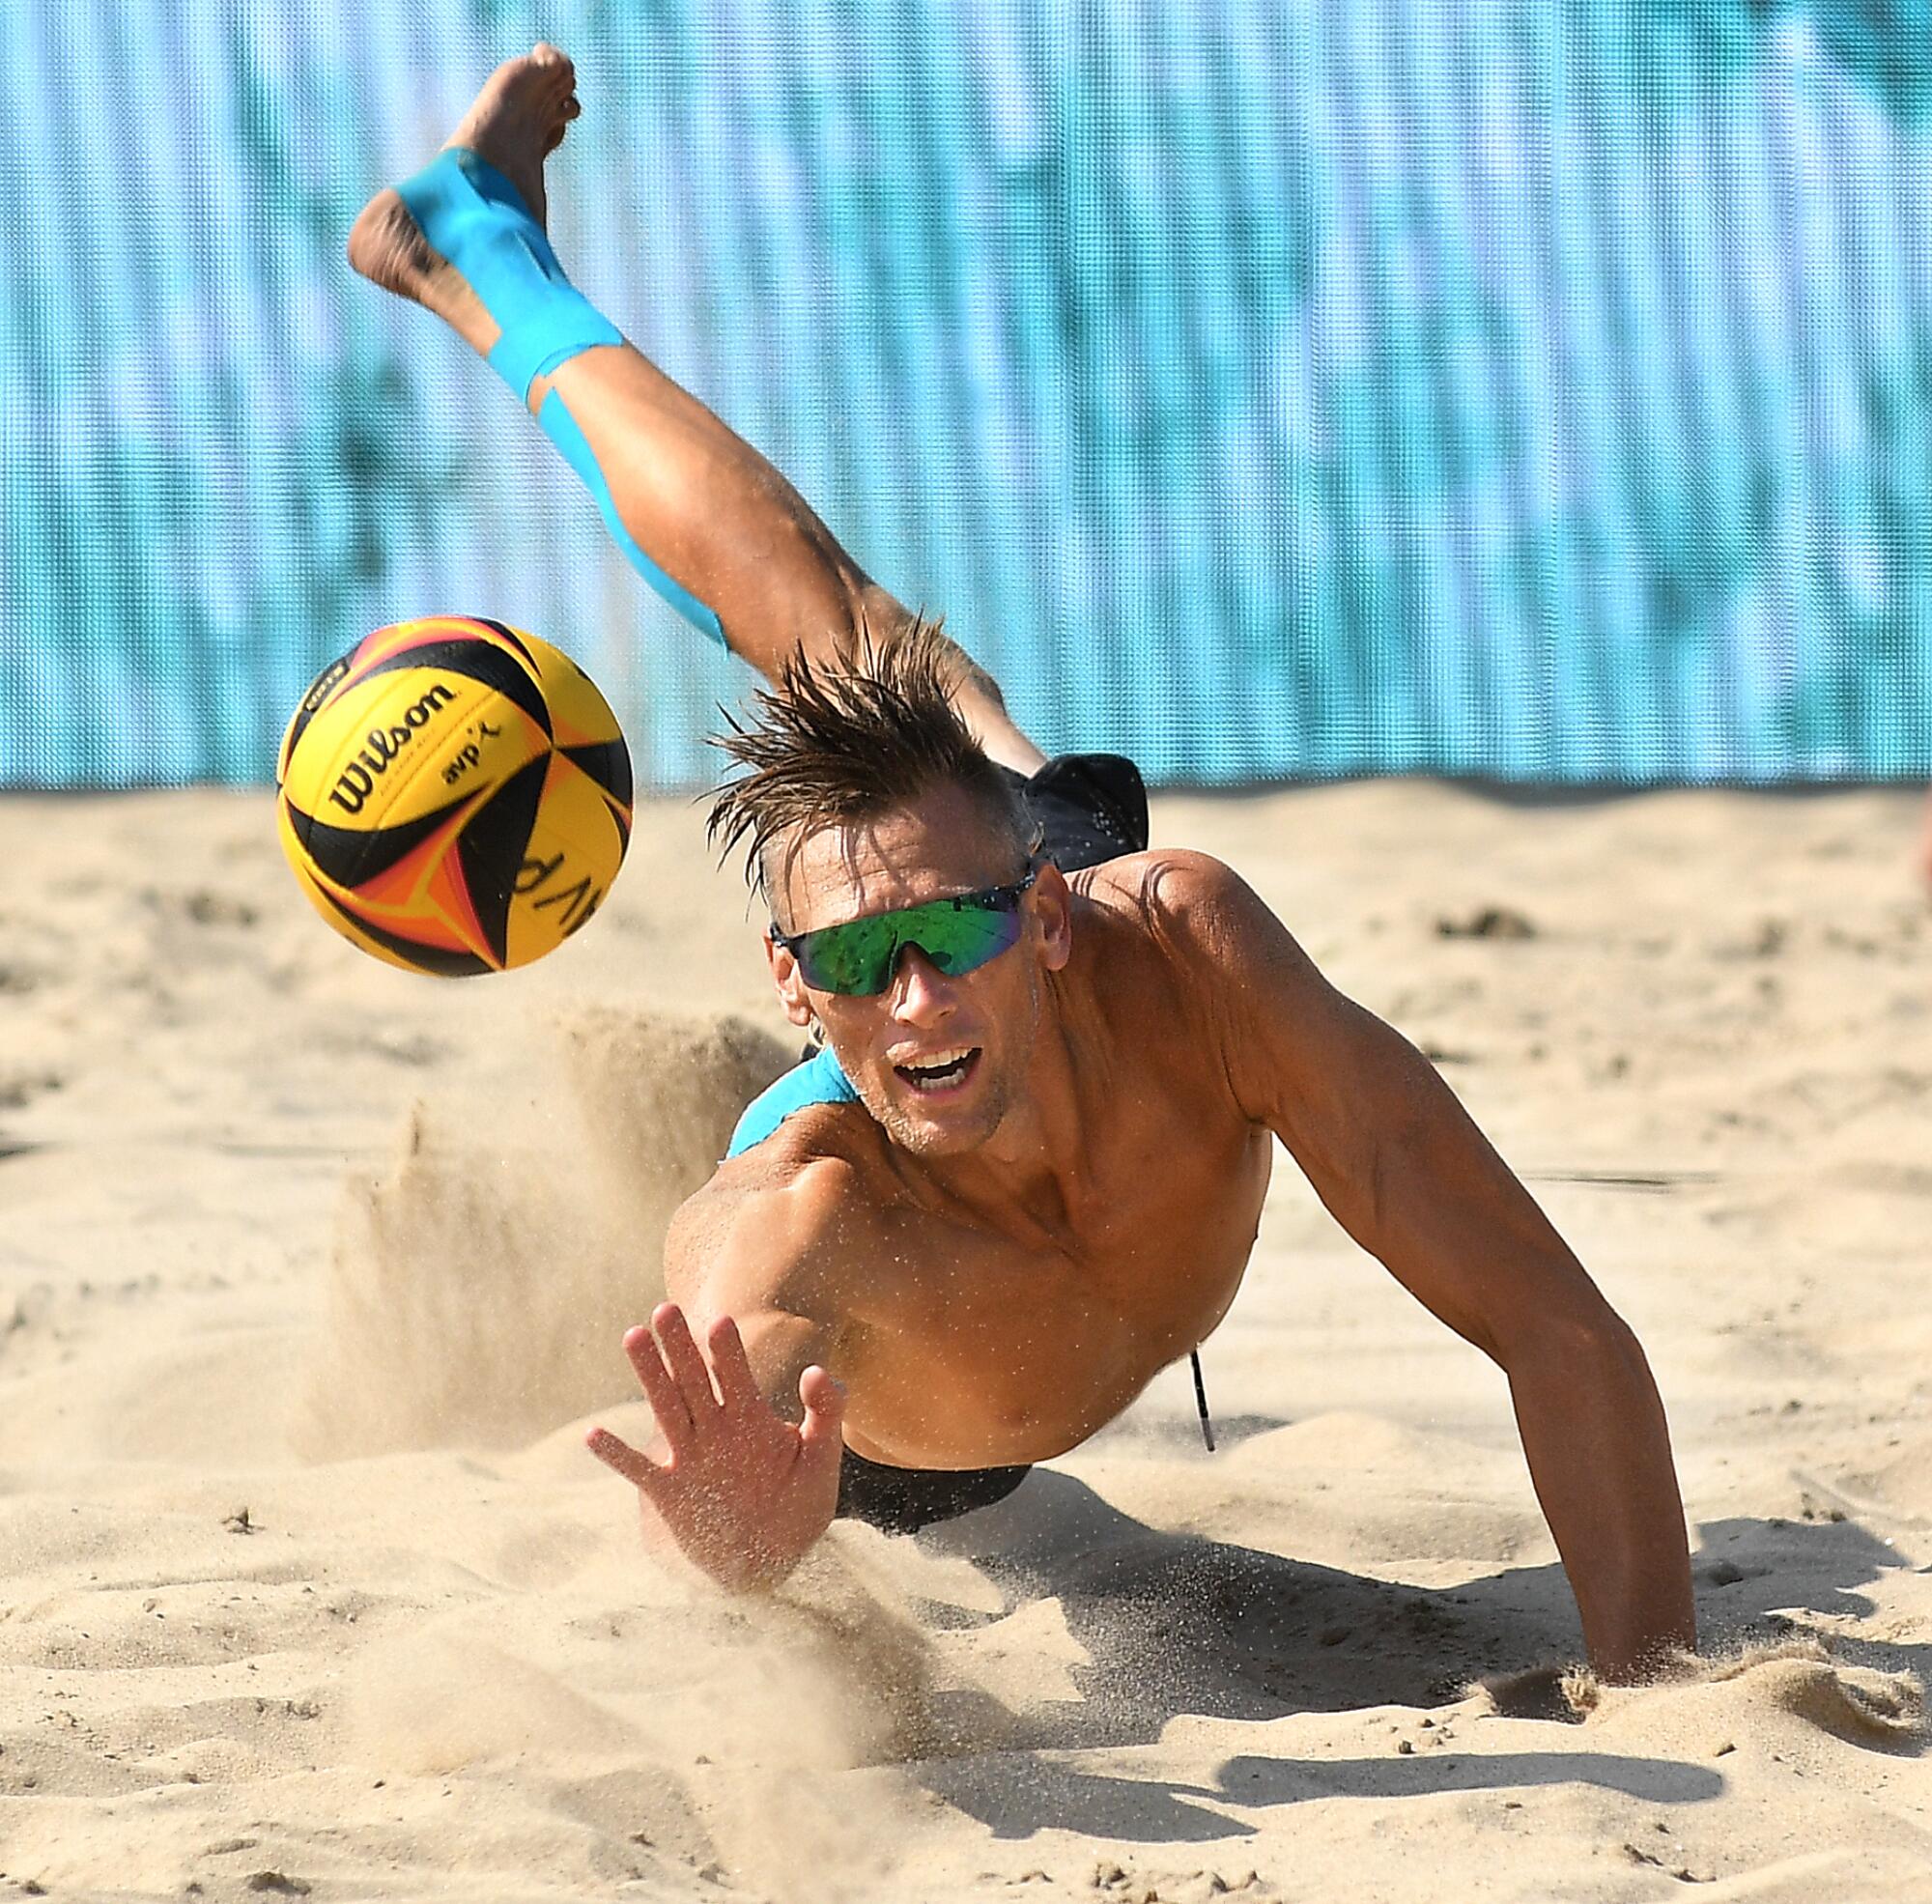 Casey Patterson dives into the sand to keep a volleyball from hitting the ground.